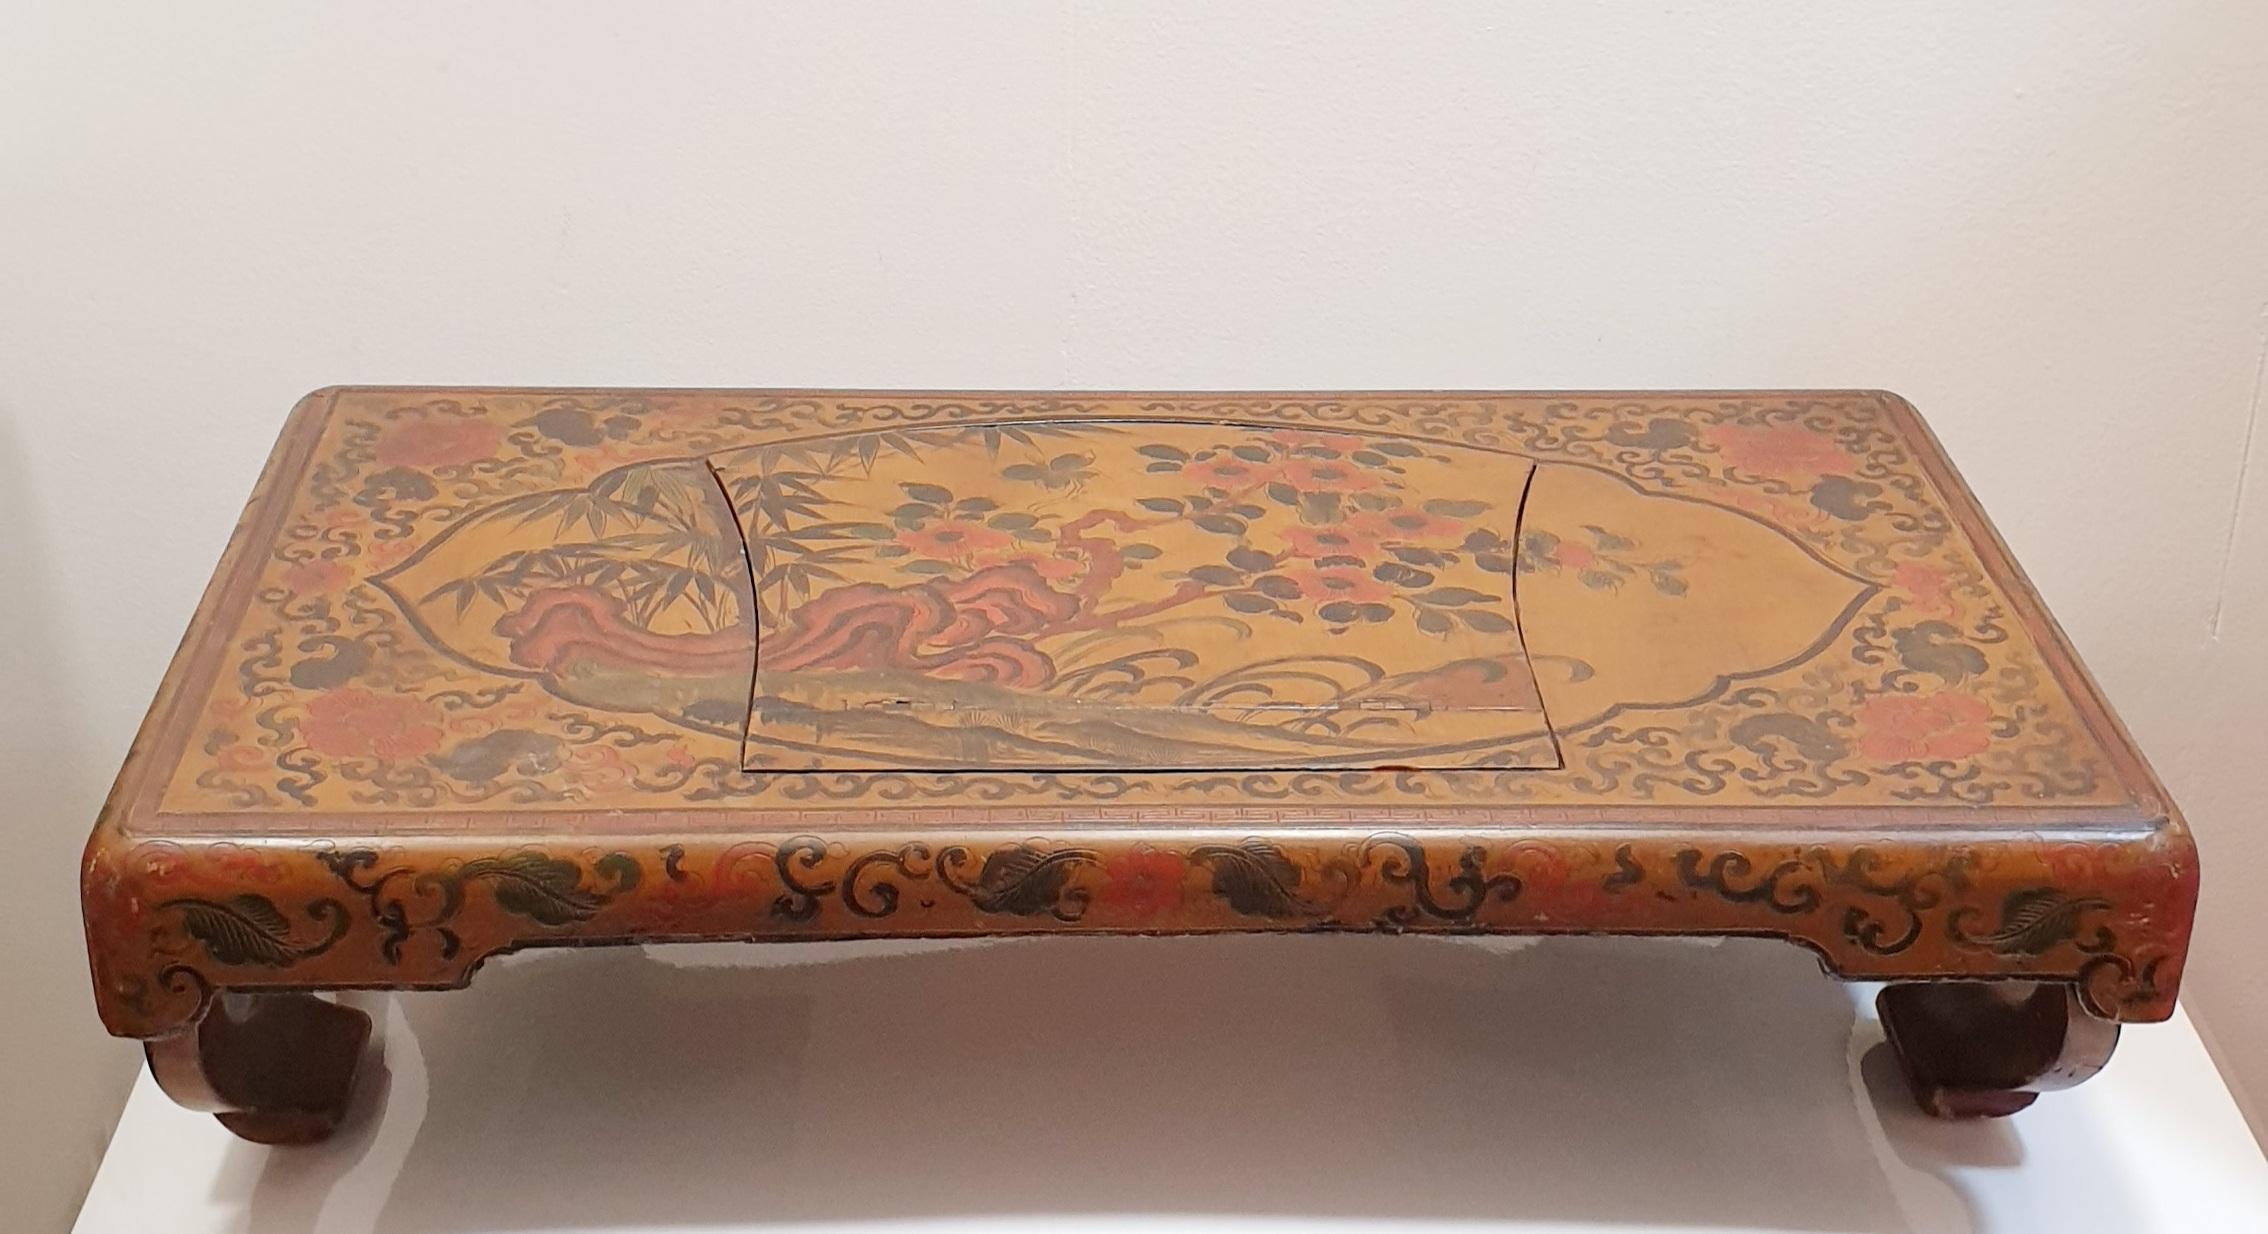 Chinese Lacquered book reading or book stool early 19th century. 
Beautiful golden lacquerd nature design book standing or book reading stool.
Measures 55 x 35 and height 17 with legs open. with legs close 5cm. 

PRADERA is a second generation